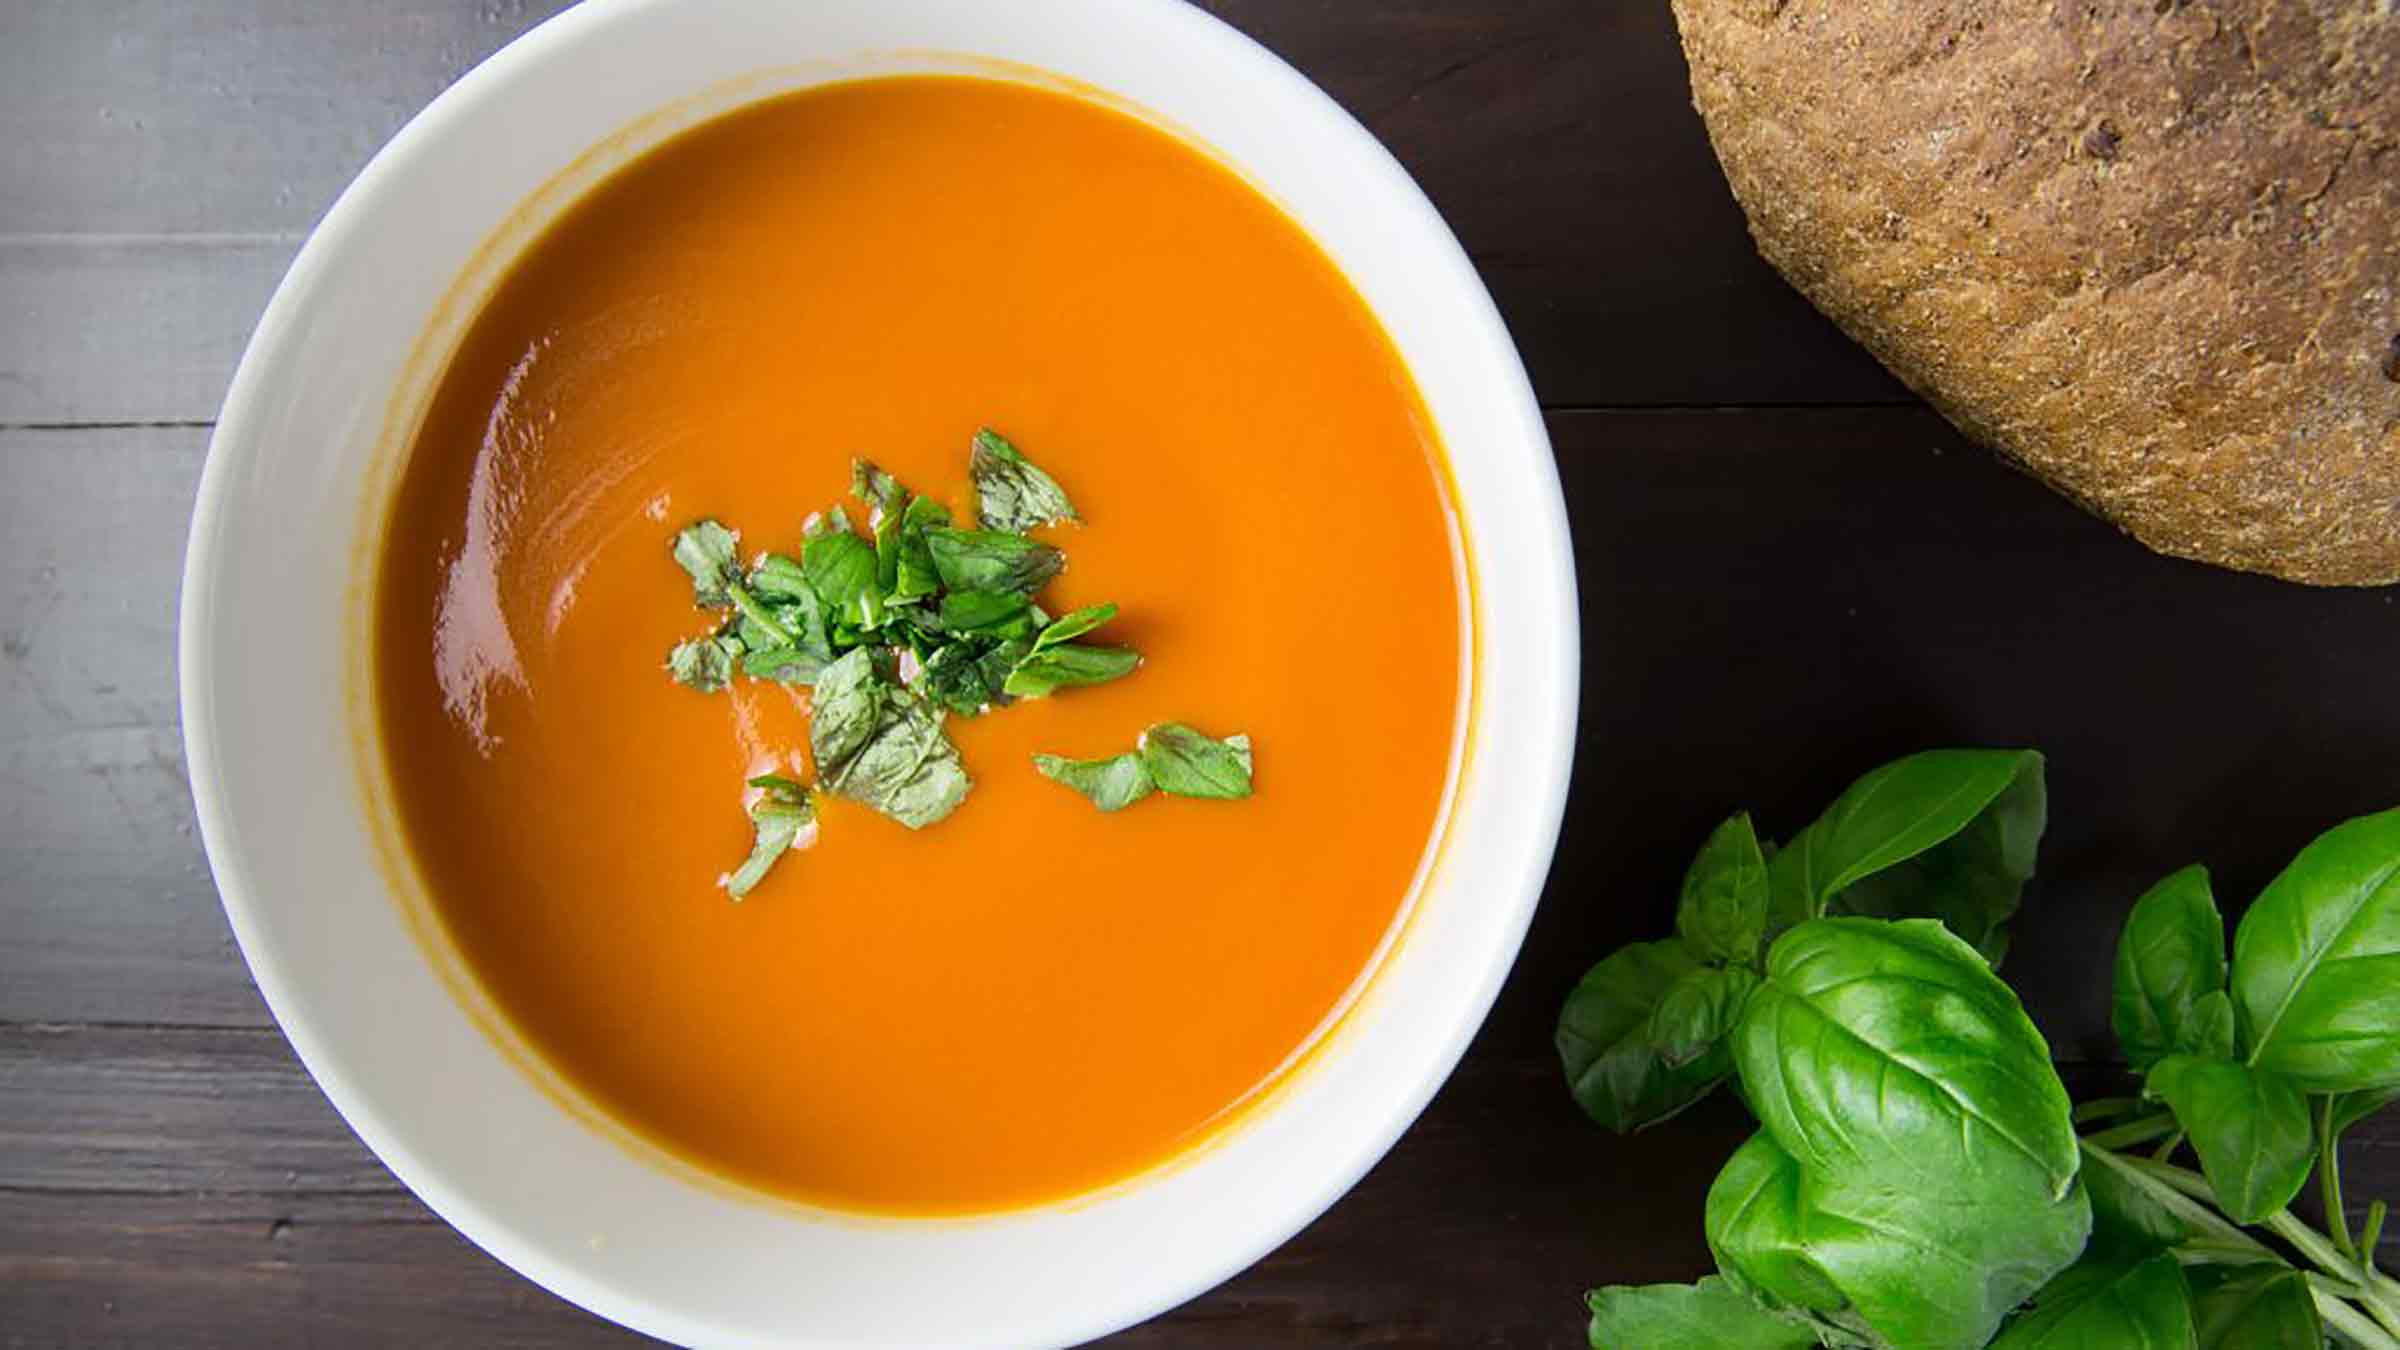 25 Soft Food Ideas for Cancer Patients